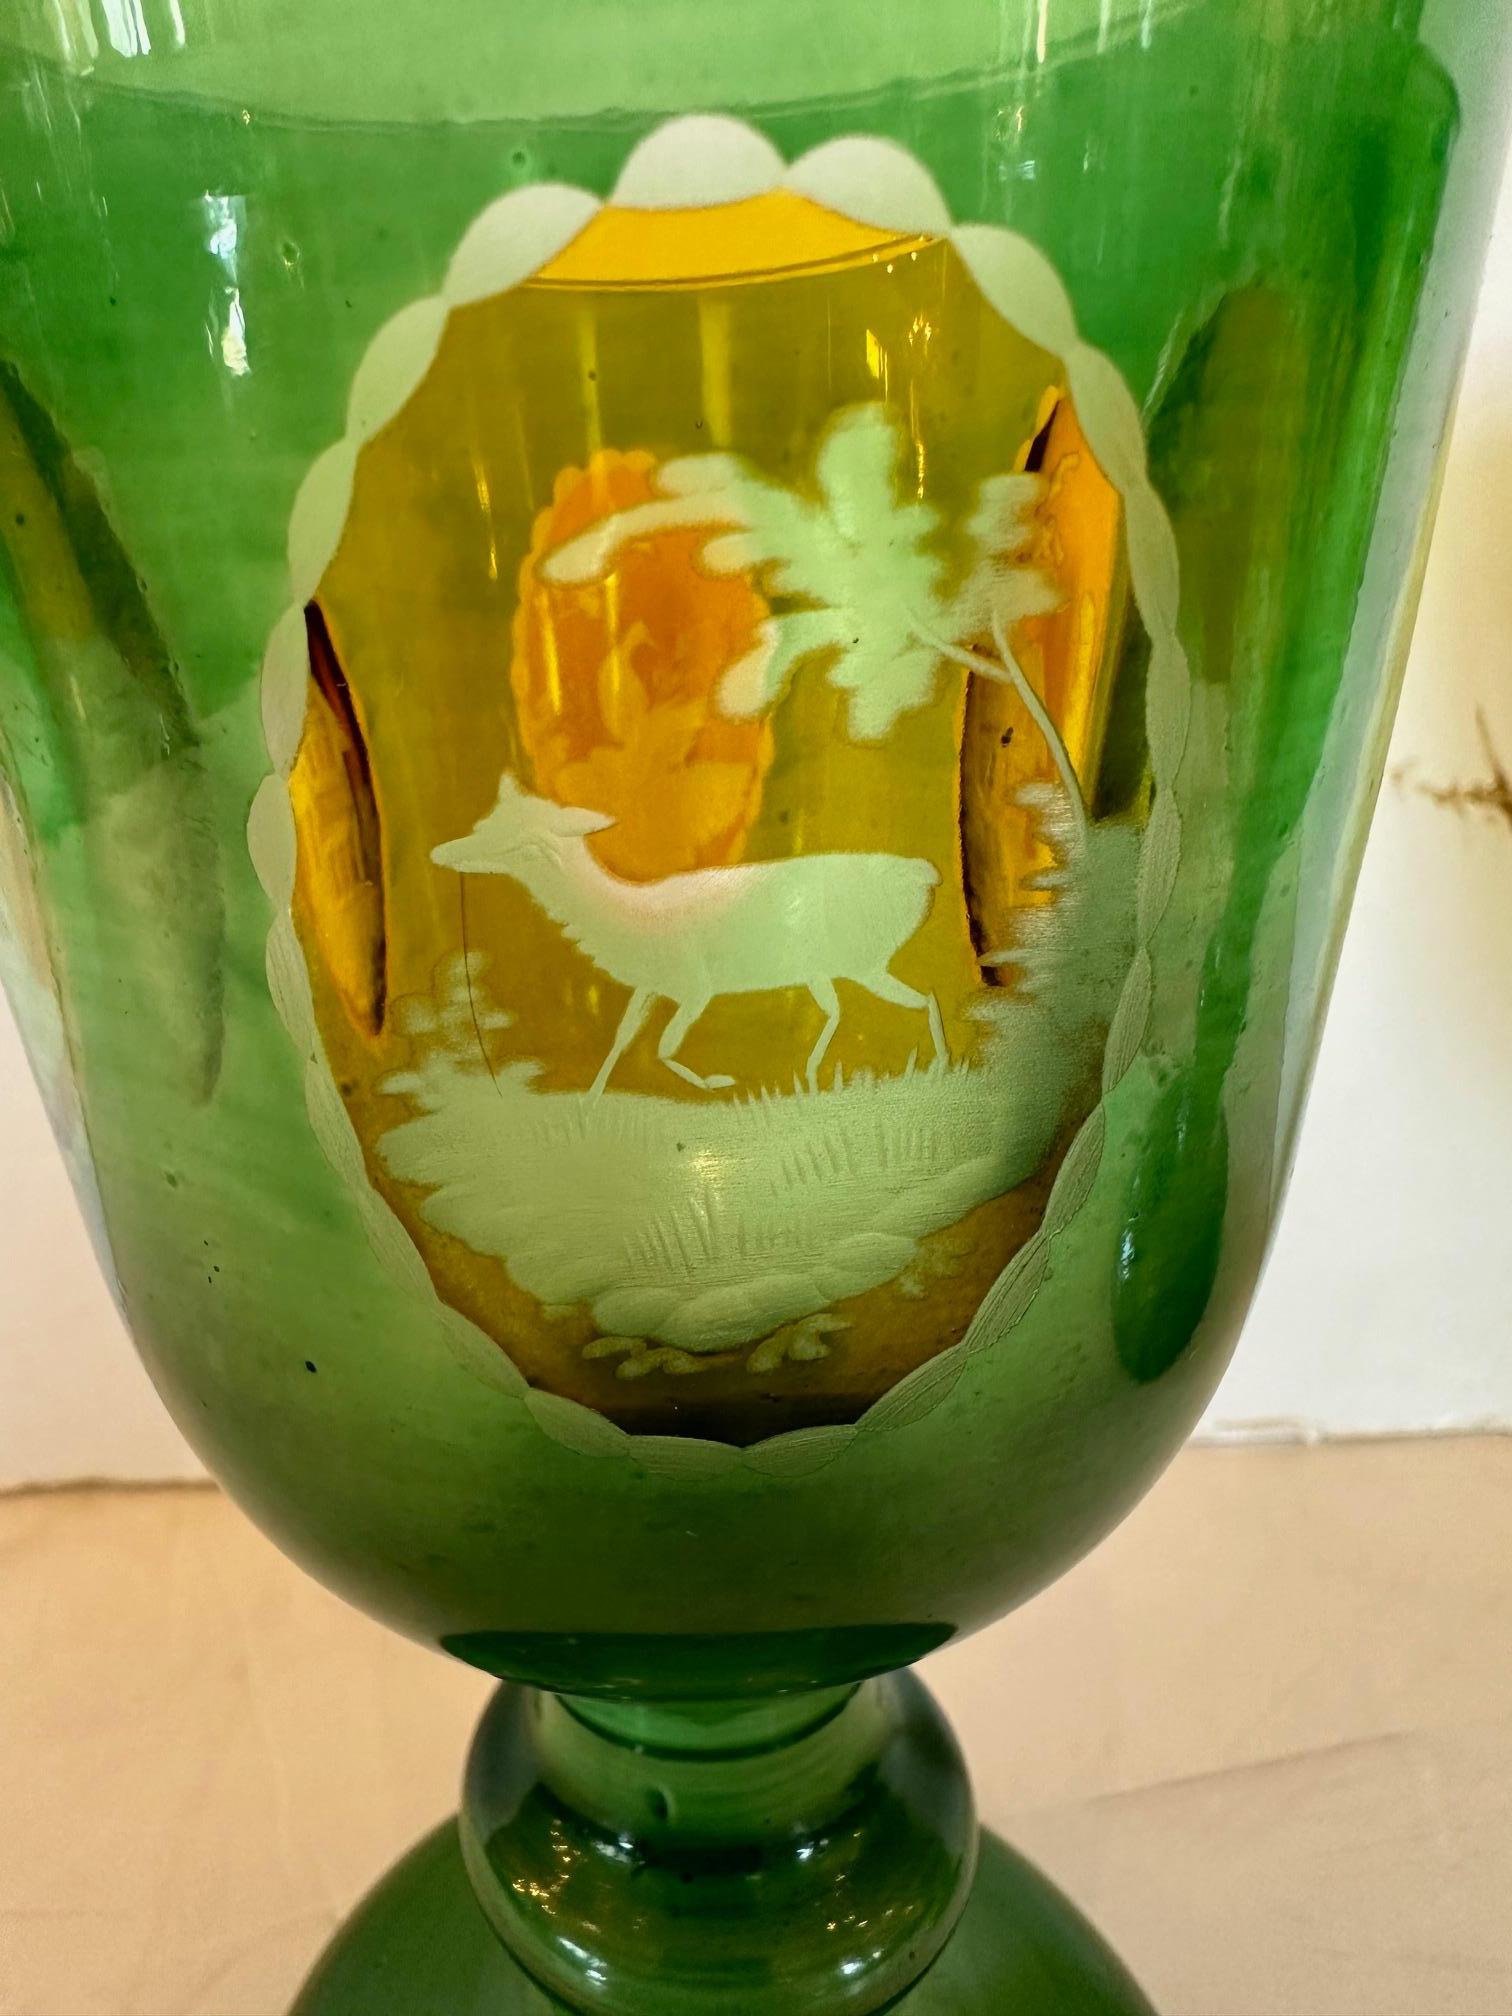 Pair of Antique 19th century Bohemian Overlay Glass Goblets       The Goblets  have a brilliant green coloring and offer four yellow intaglio panels depicting architecture and wildlife scenes.   
Made in Czech Republic 